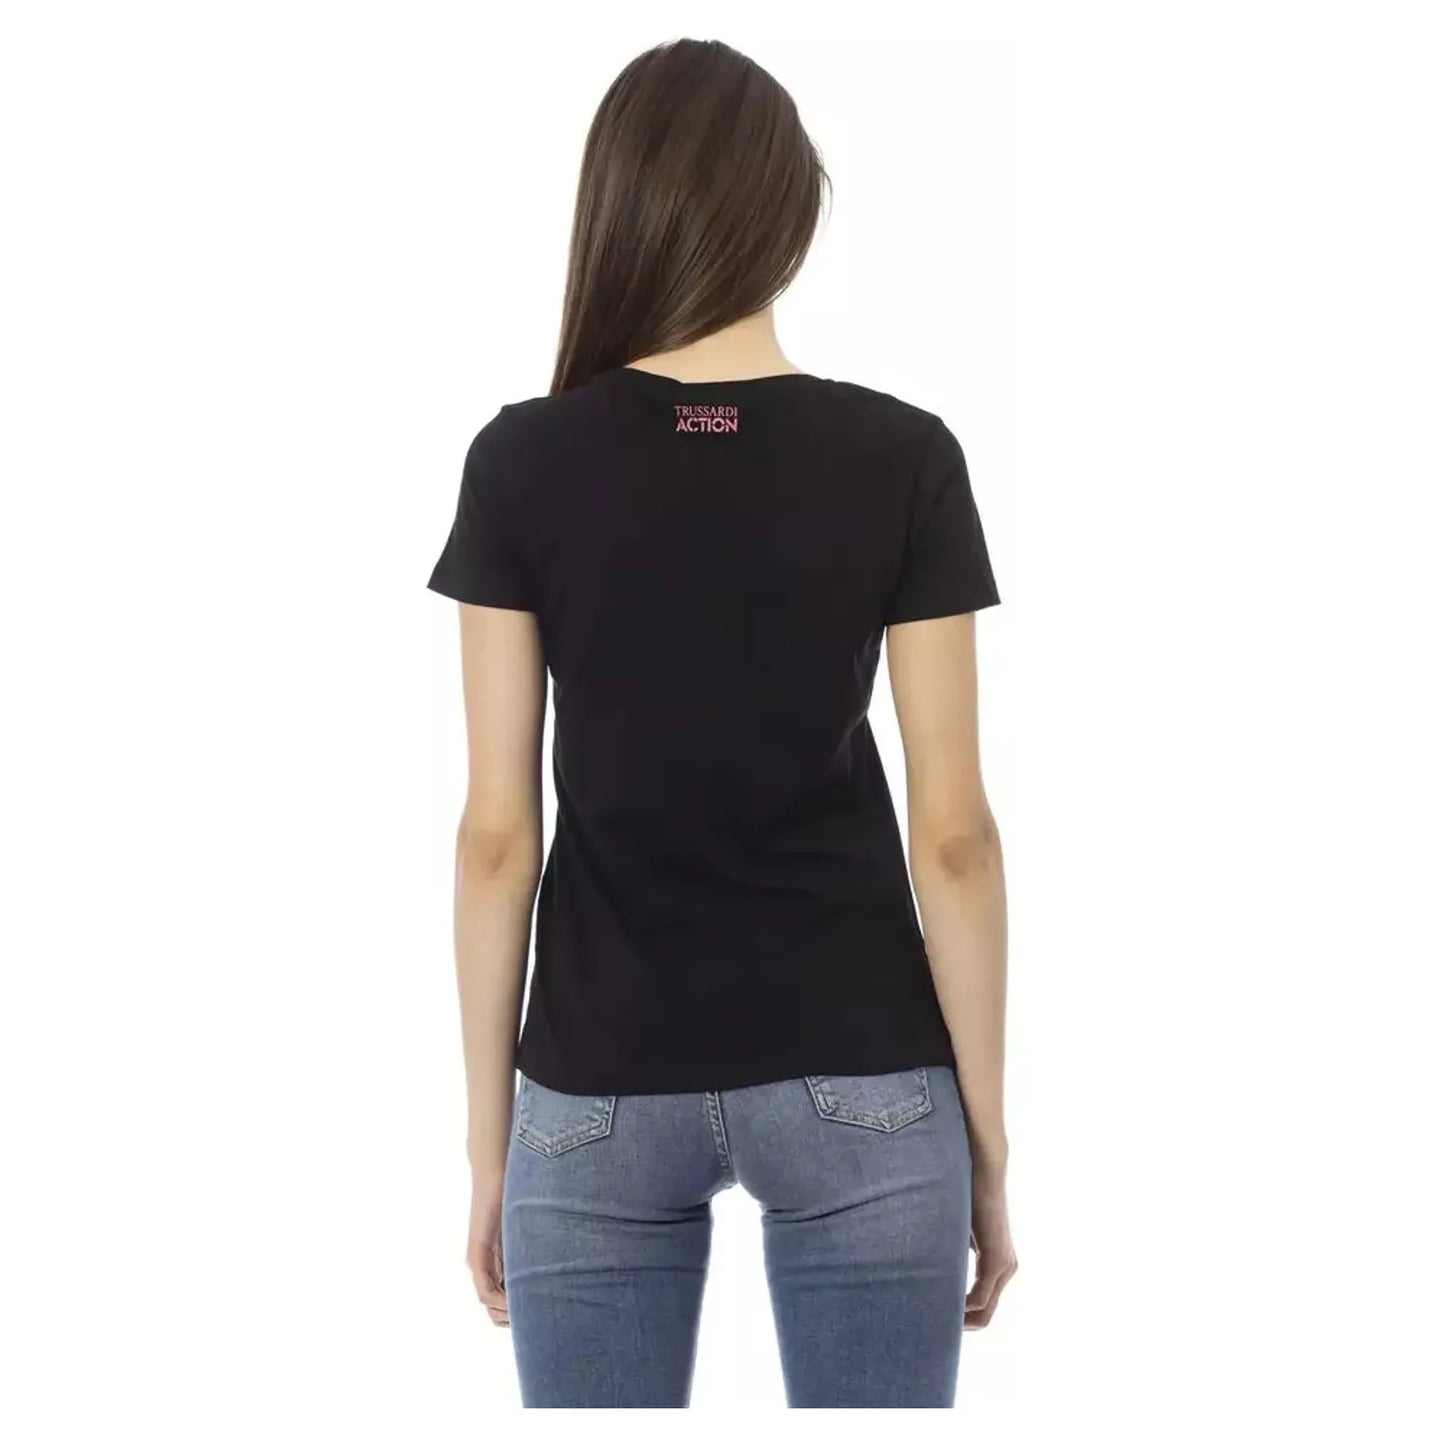 Trussardi Action Chic Black Round Neck Tee with Front Print black-cotton-tops-t-shirt-17 product-23026-30530581-19-52ba57bc-49a.webp